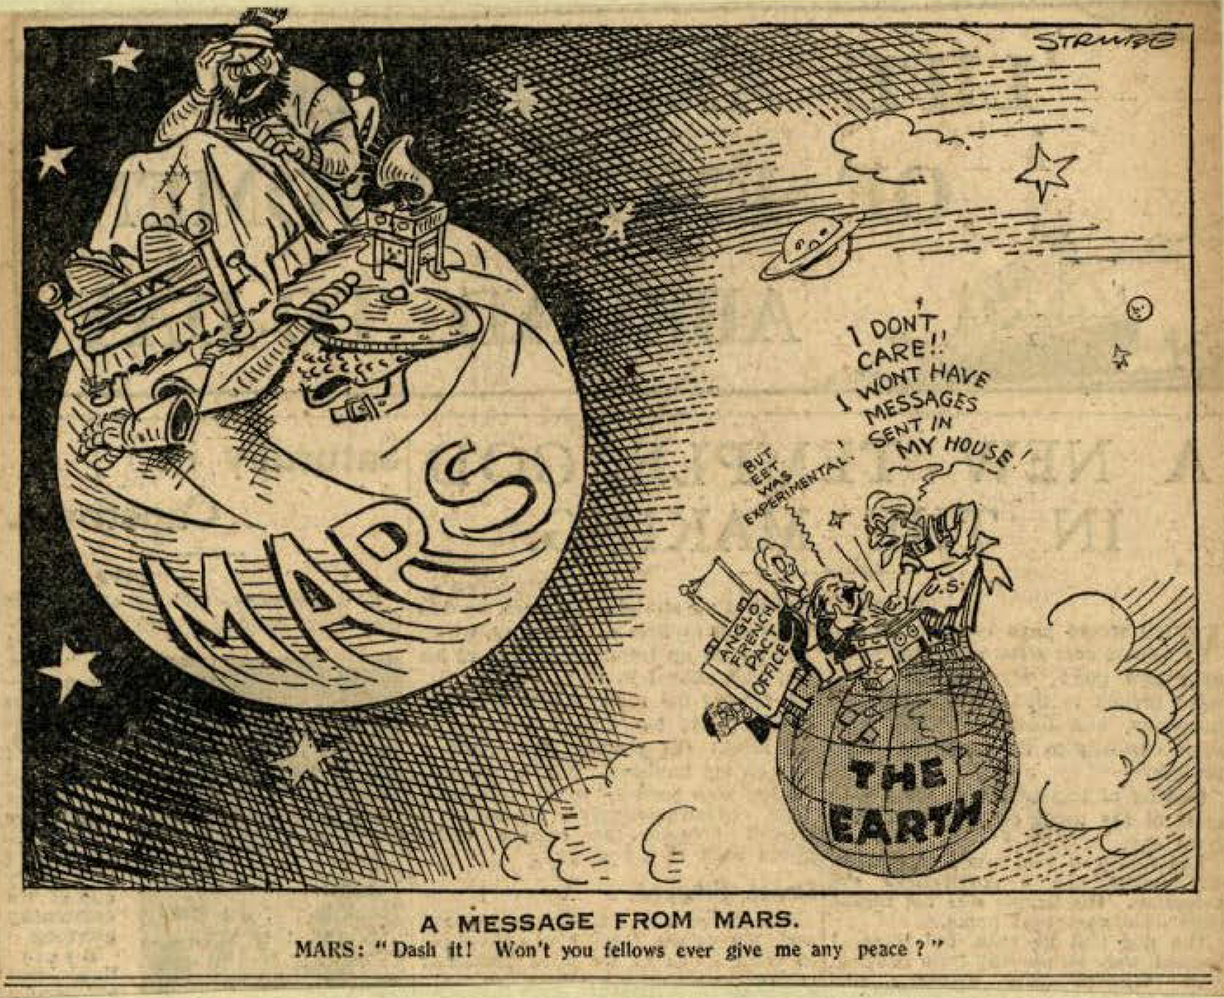 A cartoon from The Daily Express, Oct. 24, 1928. Courtesy of BT Heritage & Archives.